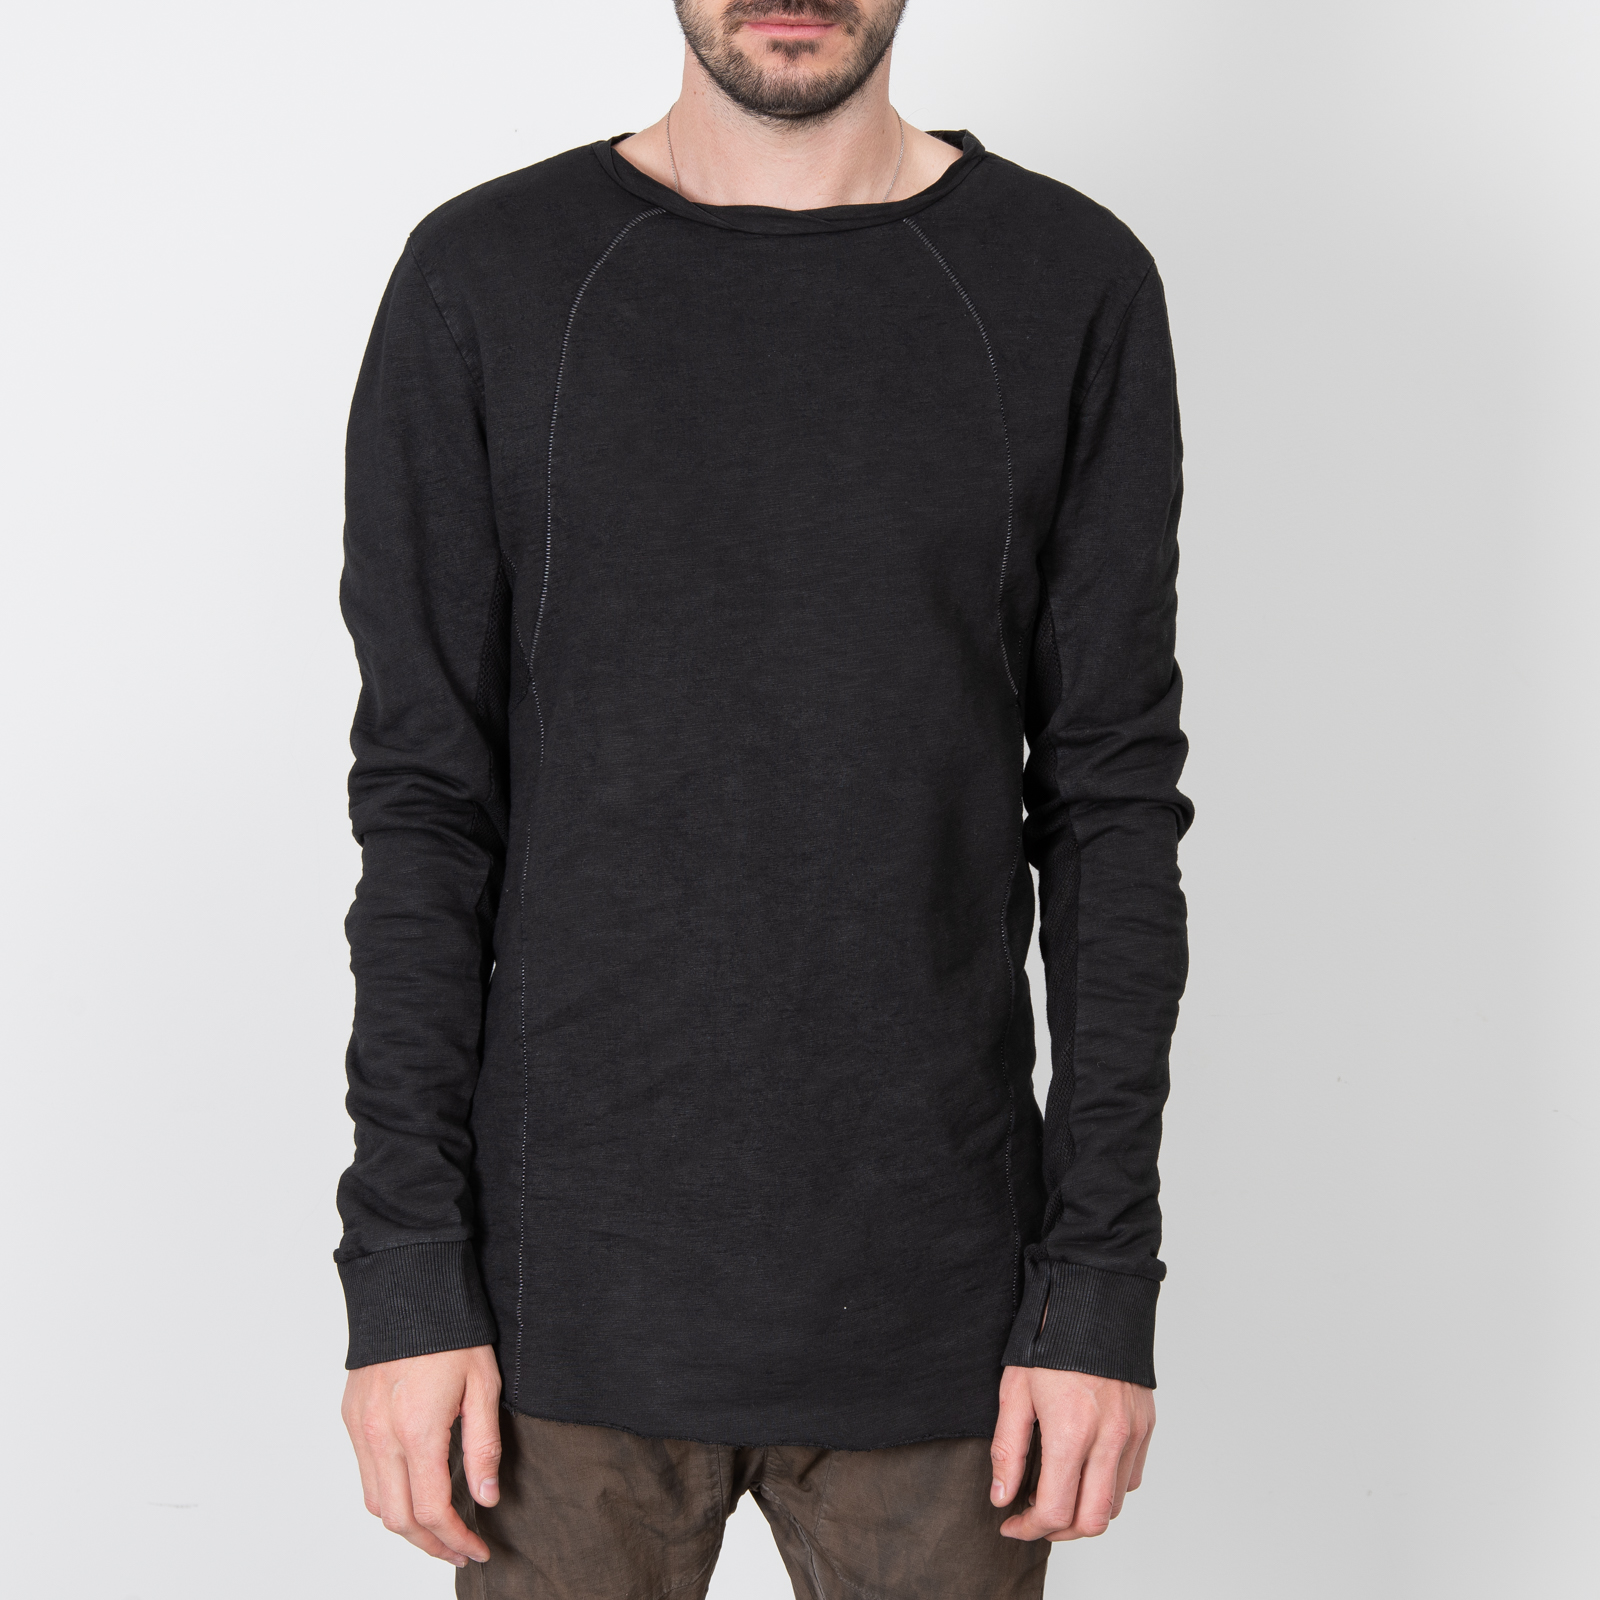 SMEARED BLACK PERFORATED TRIM PULLOVER|wolfensson